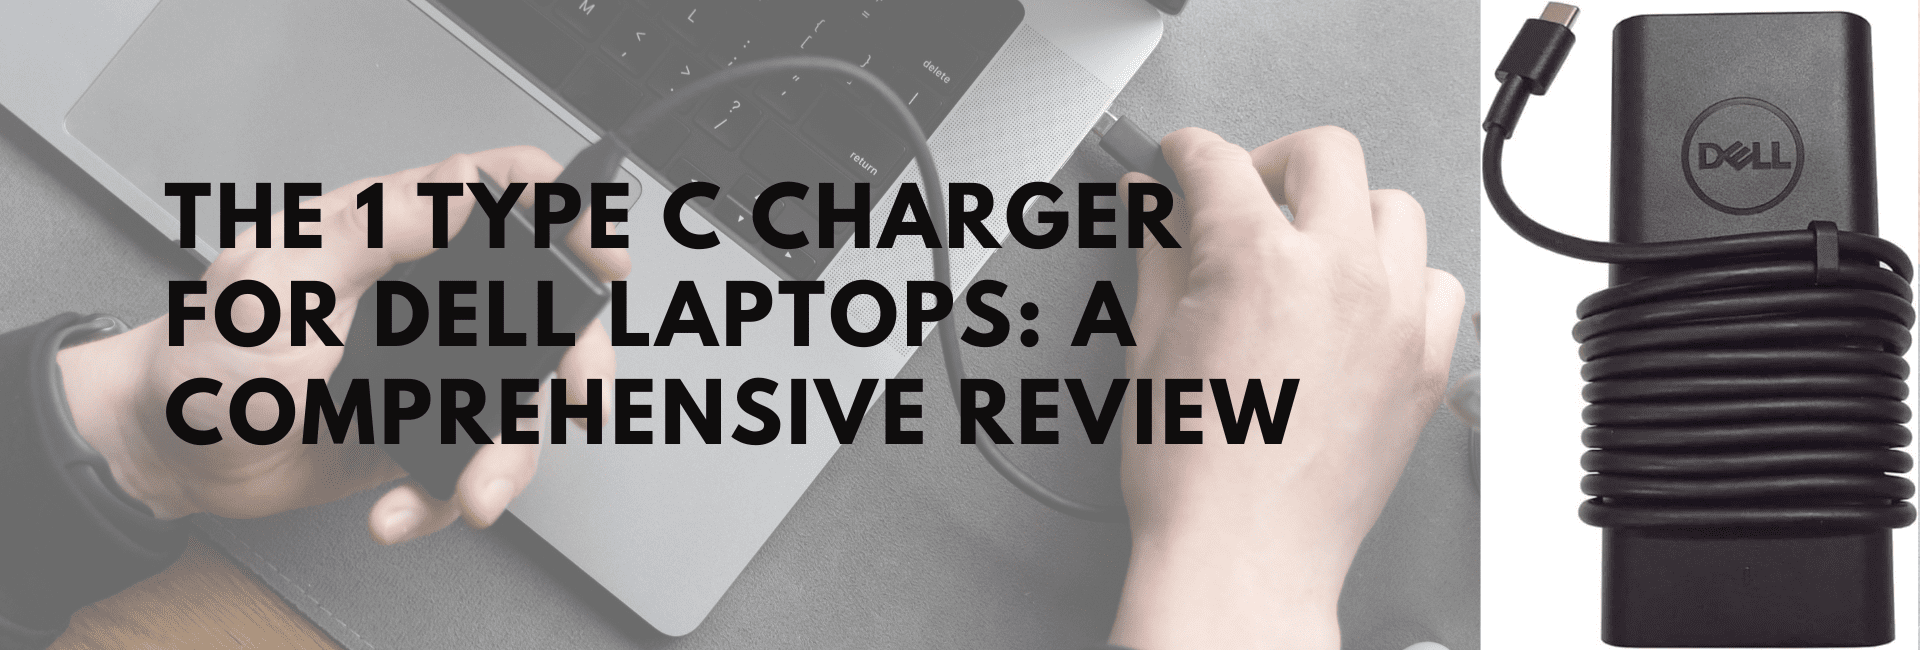 The 1 Type C Charger for Dell Laptops:  A Comprehensive Review